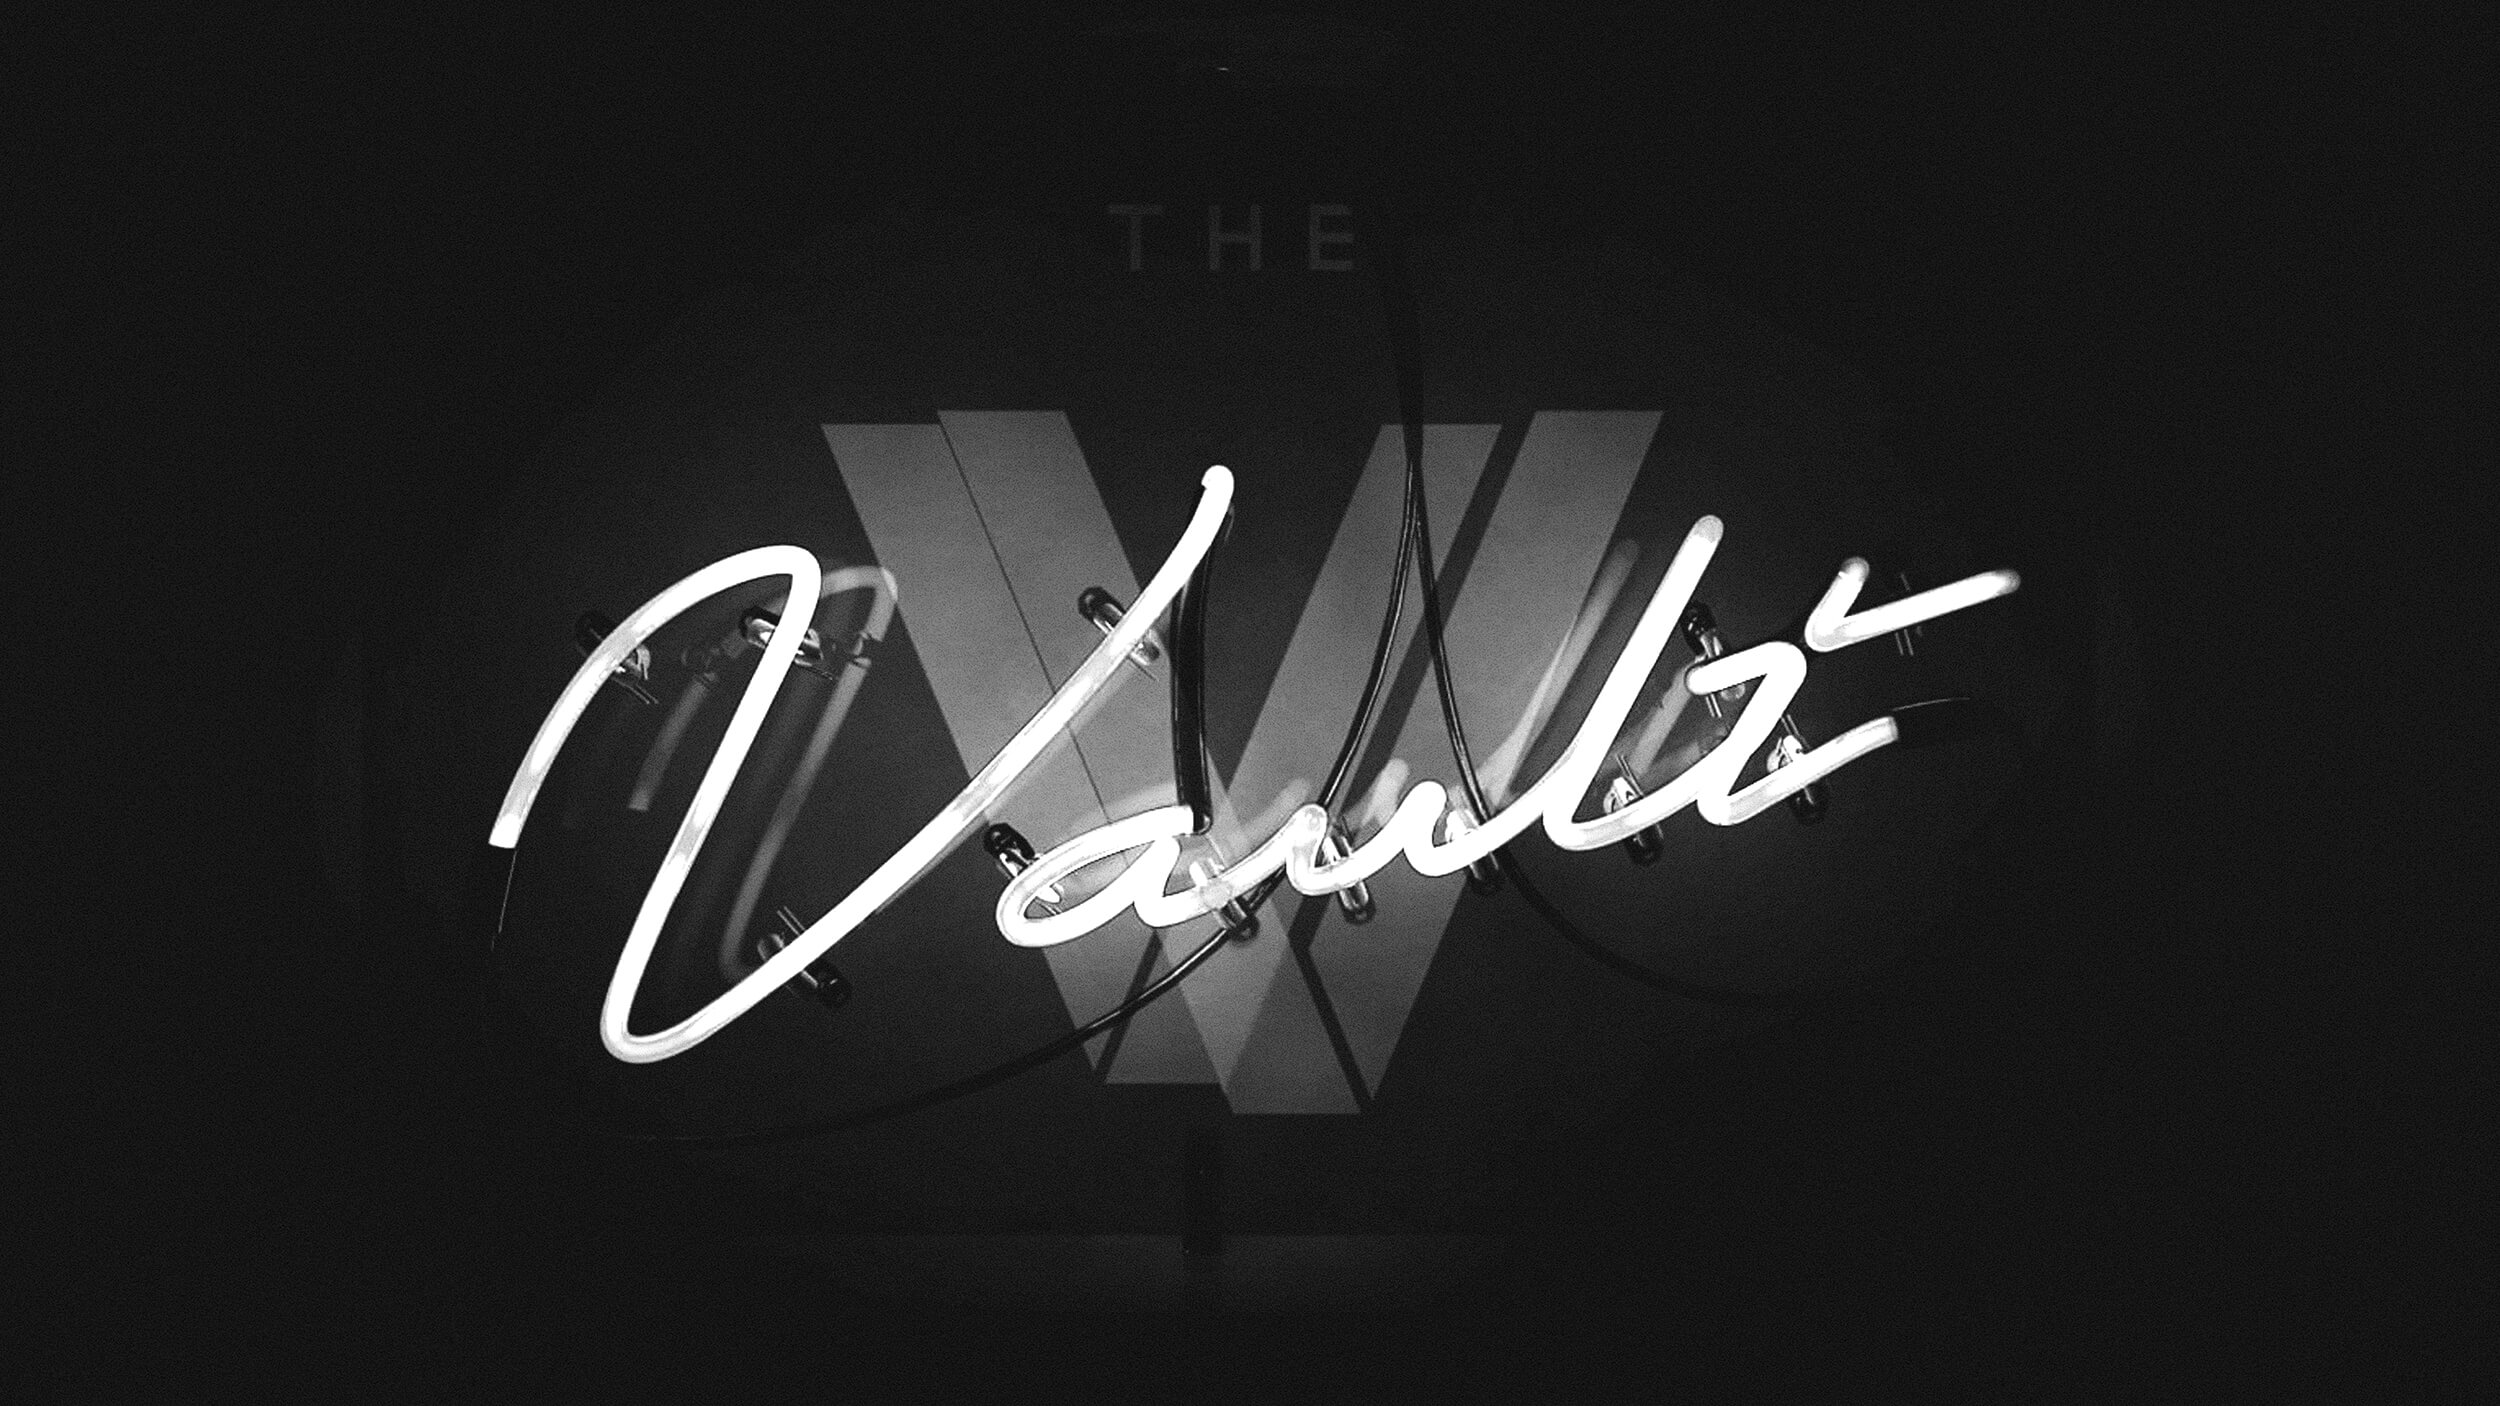 Rendering for The Vault venue visual identity in Nashville featuring neon and metal signage render